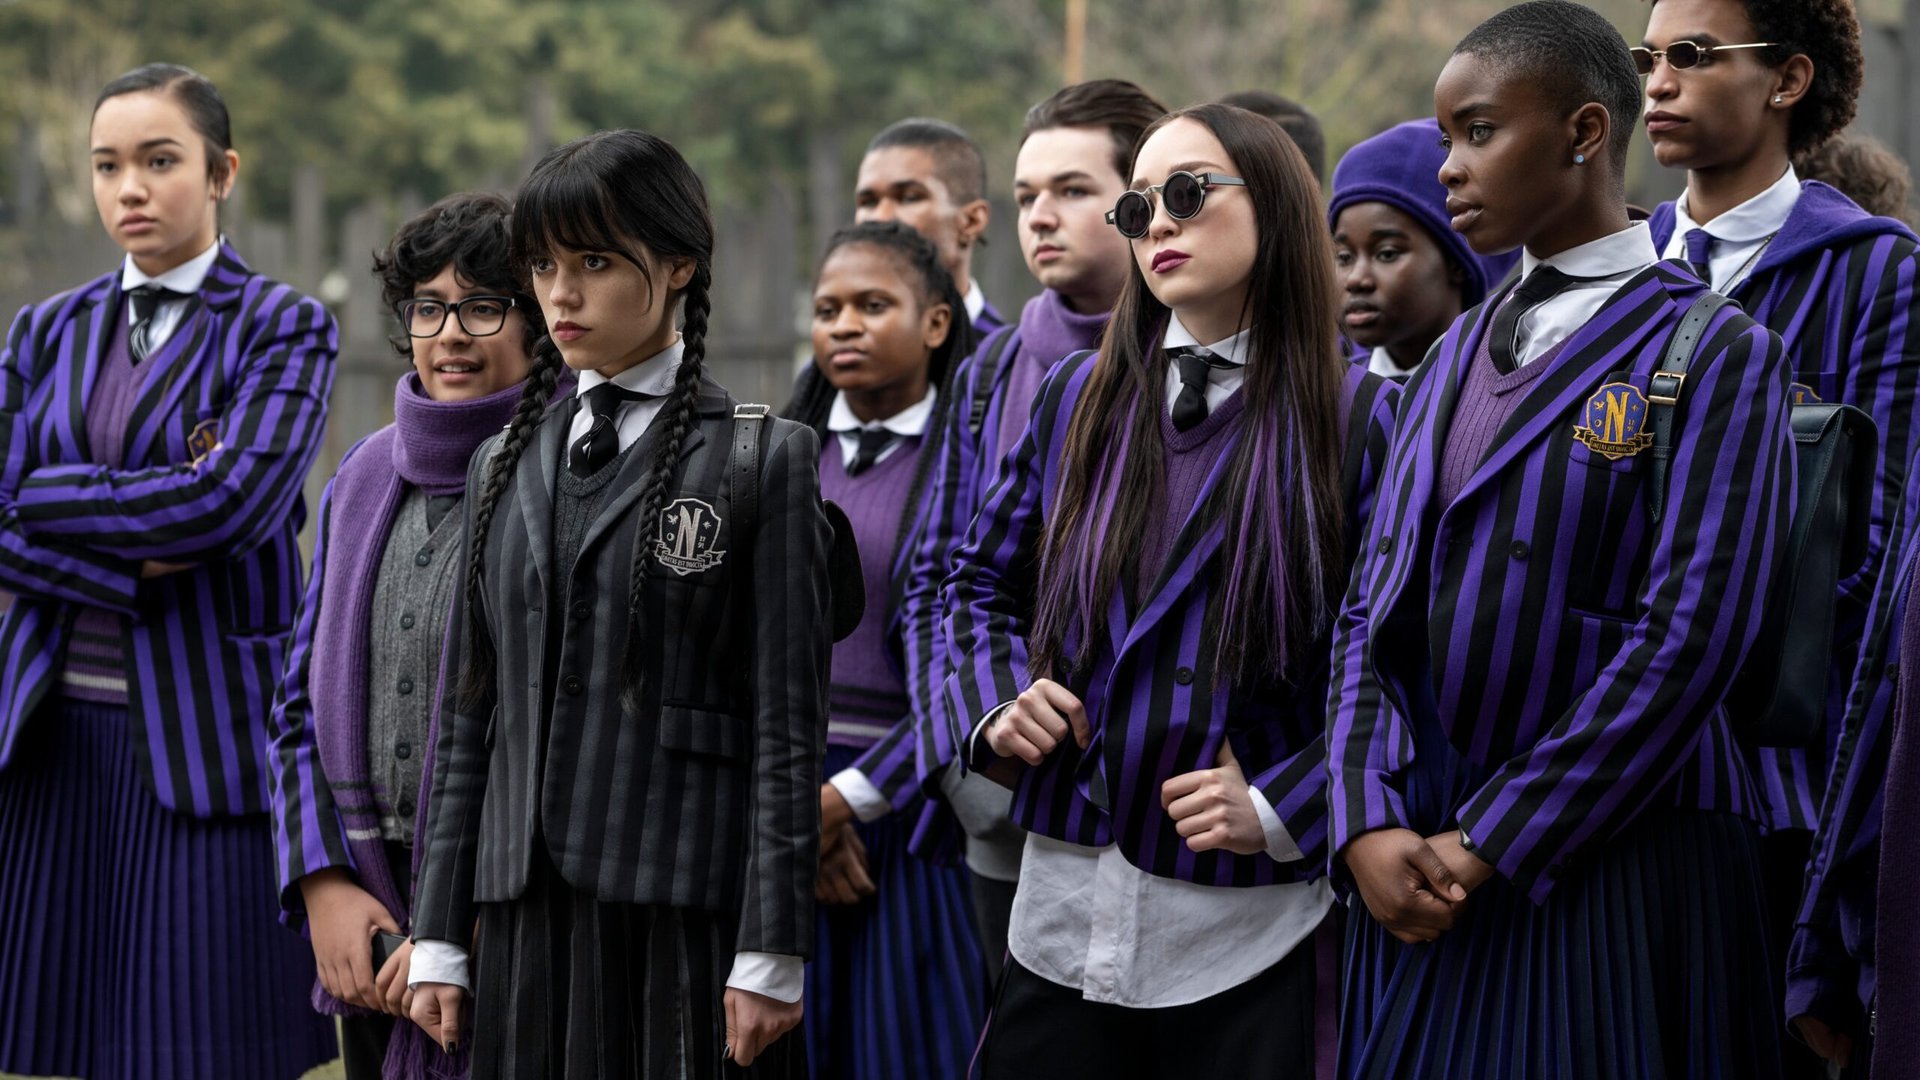 Wednesday Addams stands with a group of classmates in their school uniforms in Wednesday